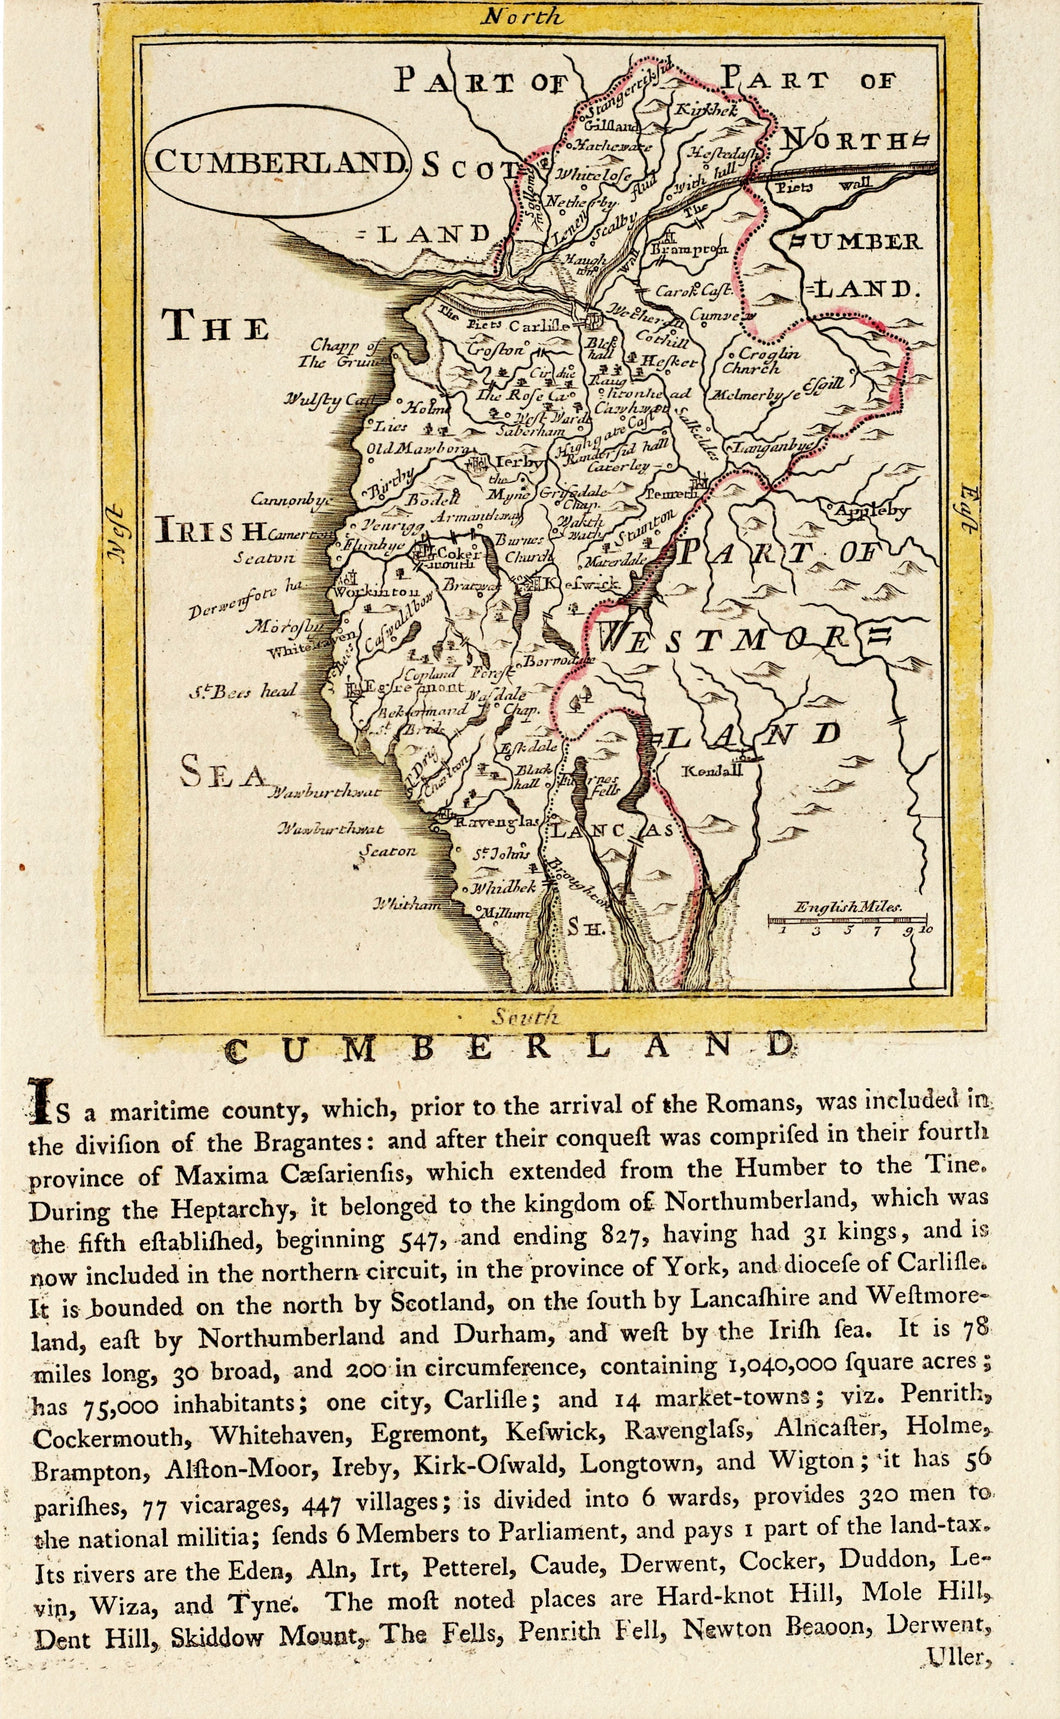 Cumberland - Antique Map by Seller and Grose circa 1787